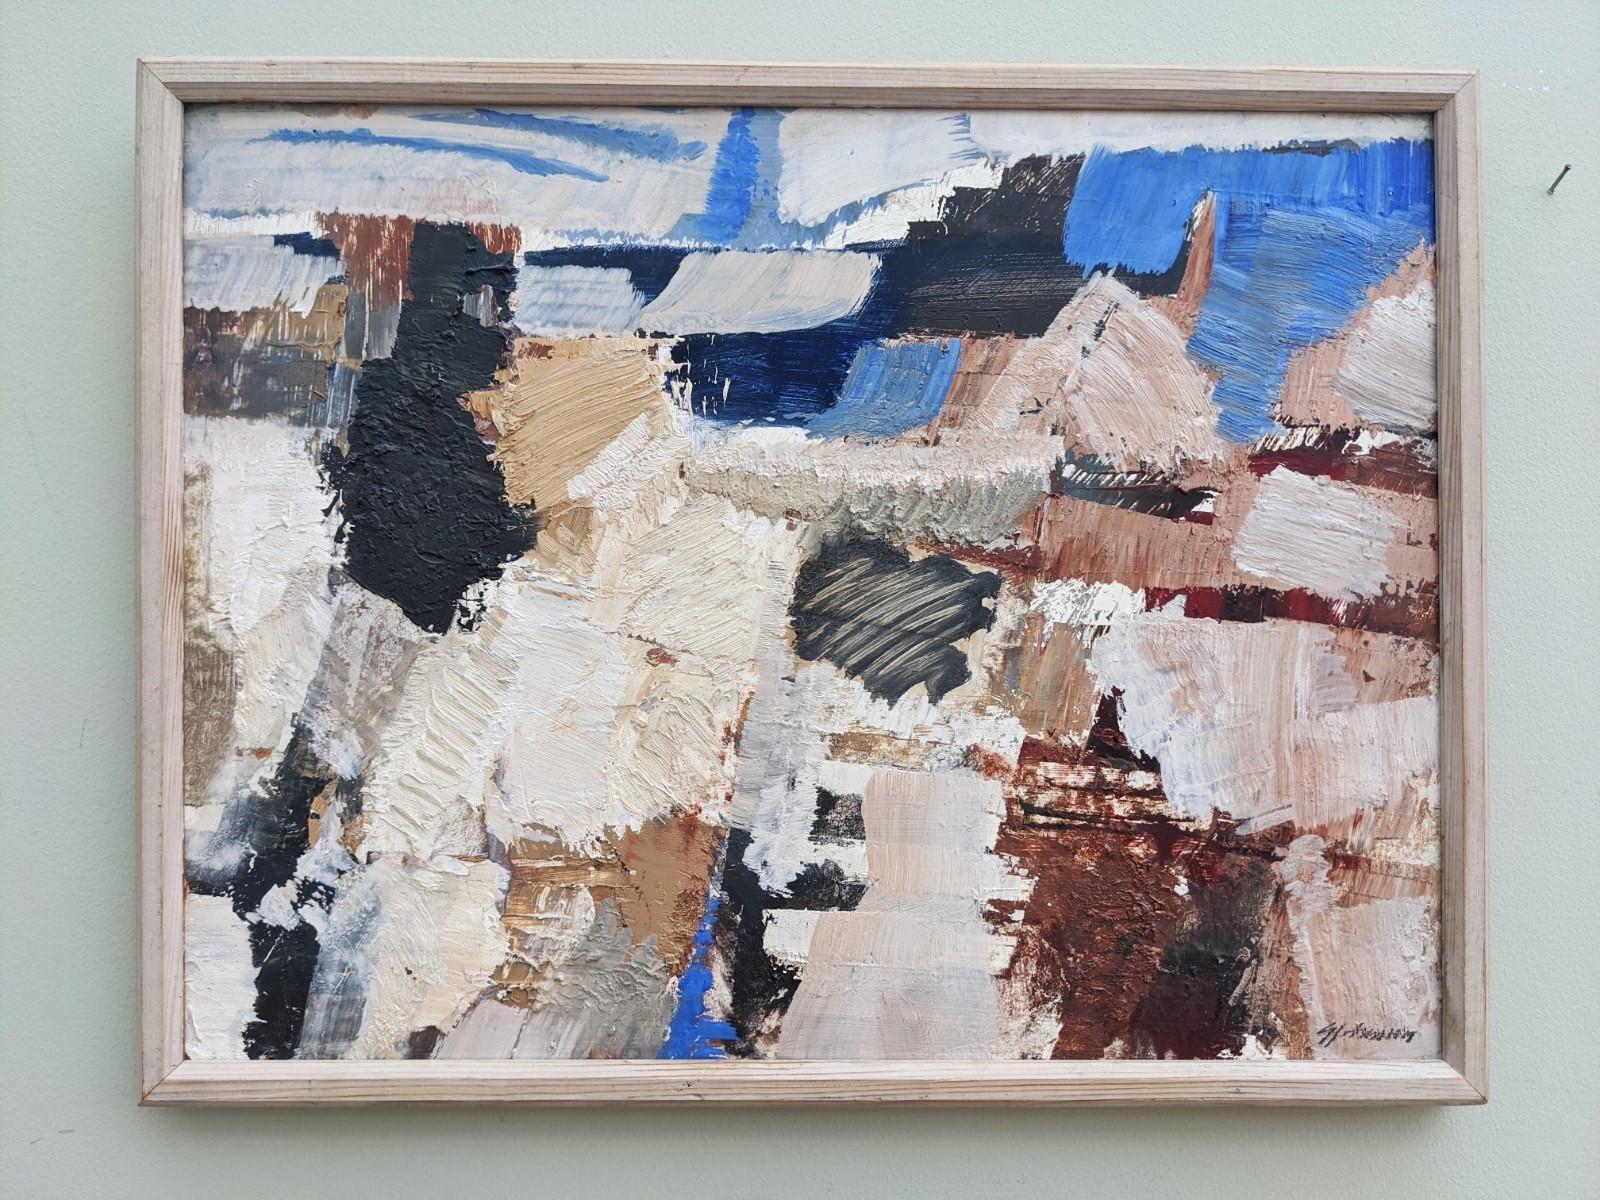 ABSTRACT PALETTE
Size: 37 x 47 cm (including frame)
Oil on Board

A skilfully executed mid century abstract painted in oil onto board by Swedish painter Ivar Morsing. It features a combination of broad brushwork and fluid paint applied both thinly